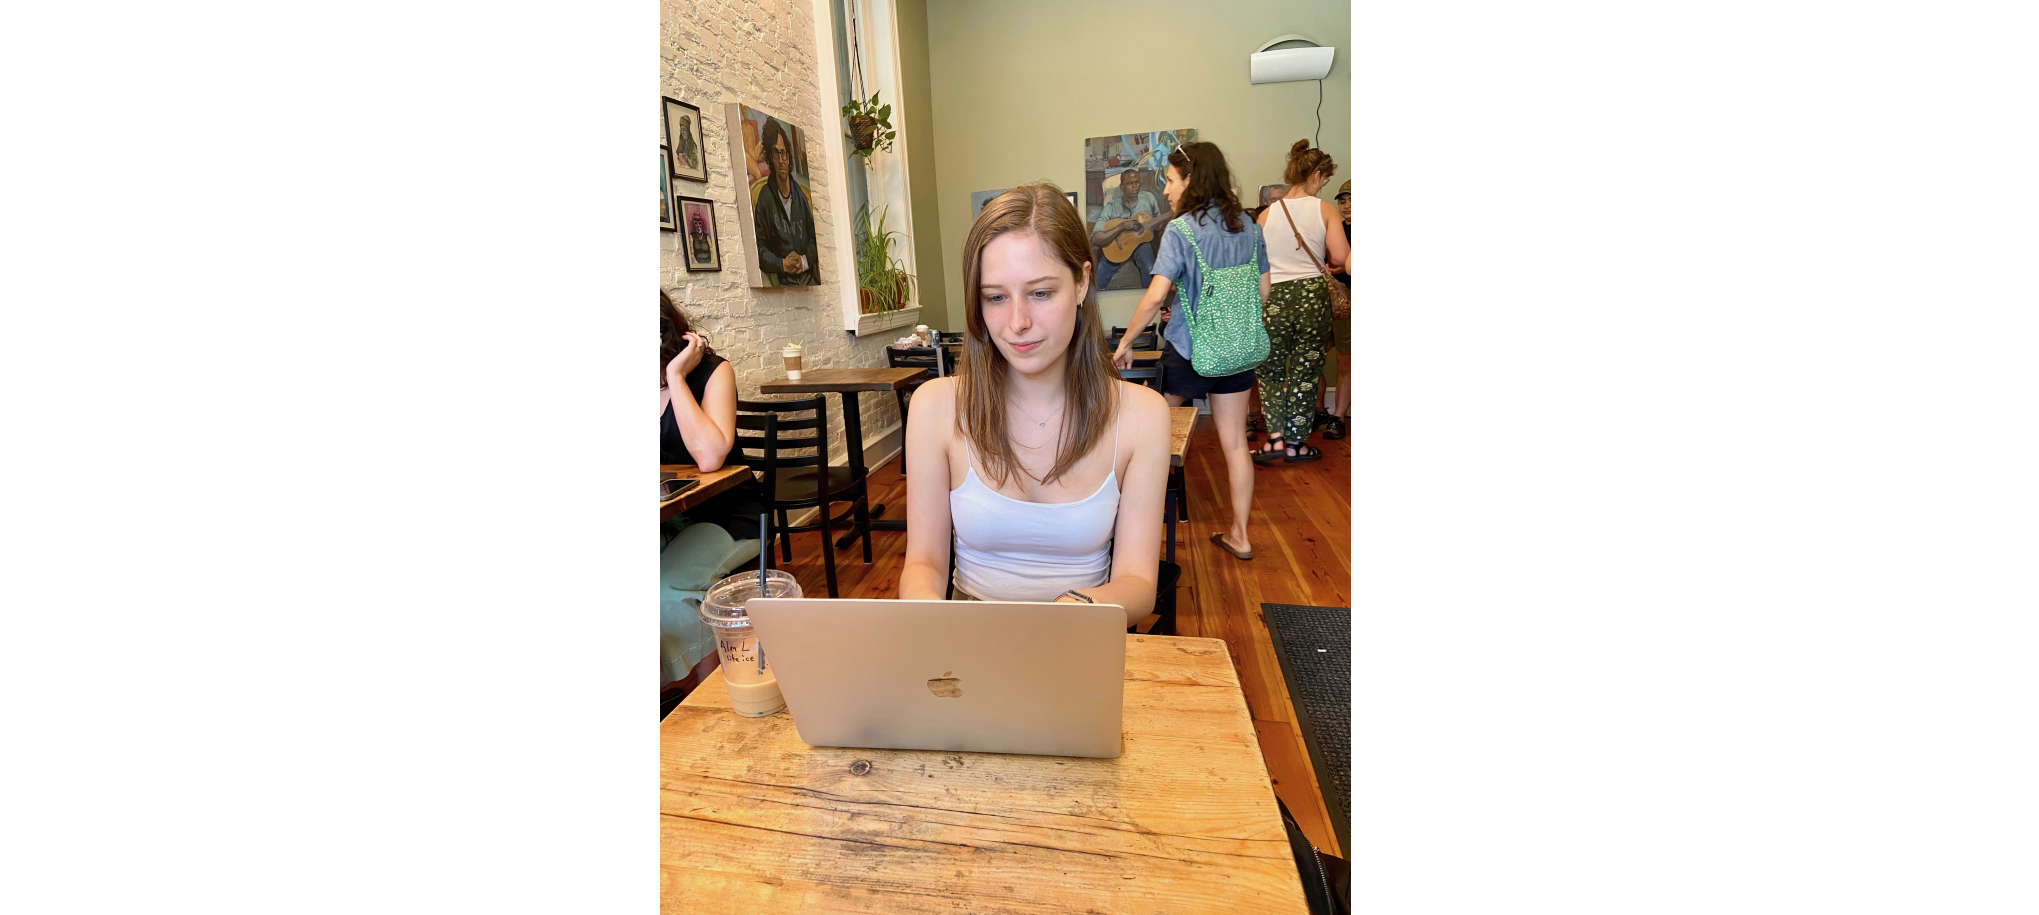 Miette doing virtual research in a coffee shop!